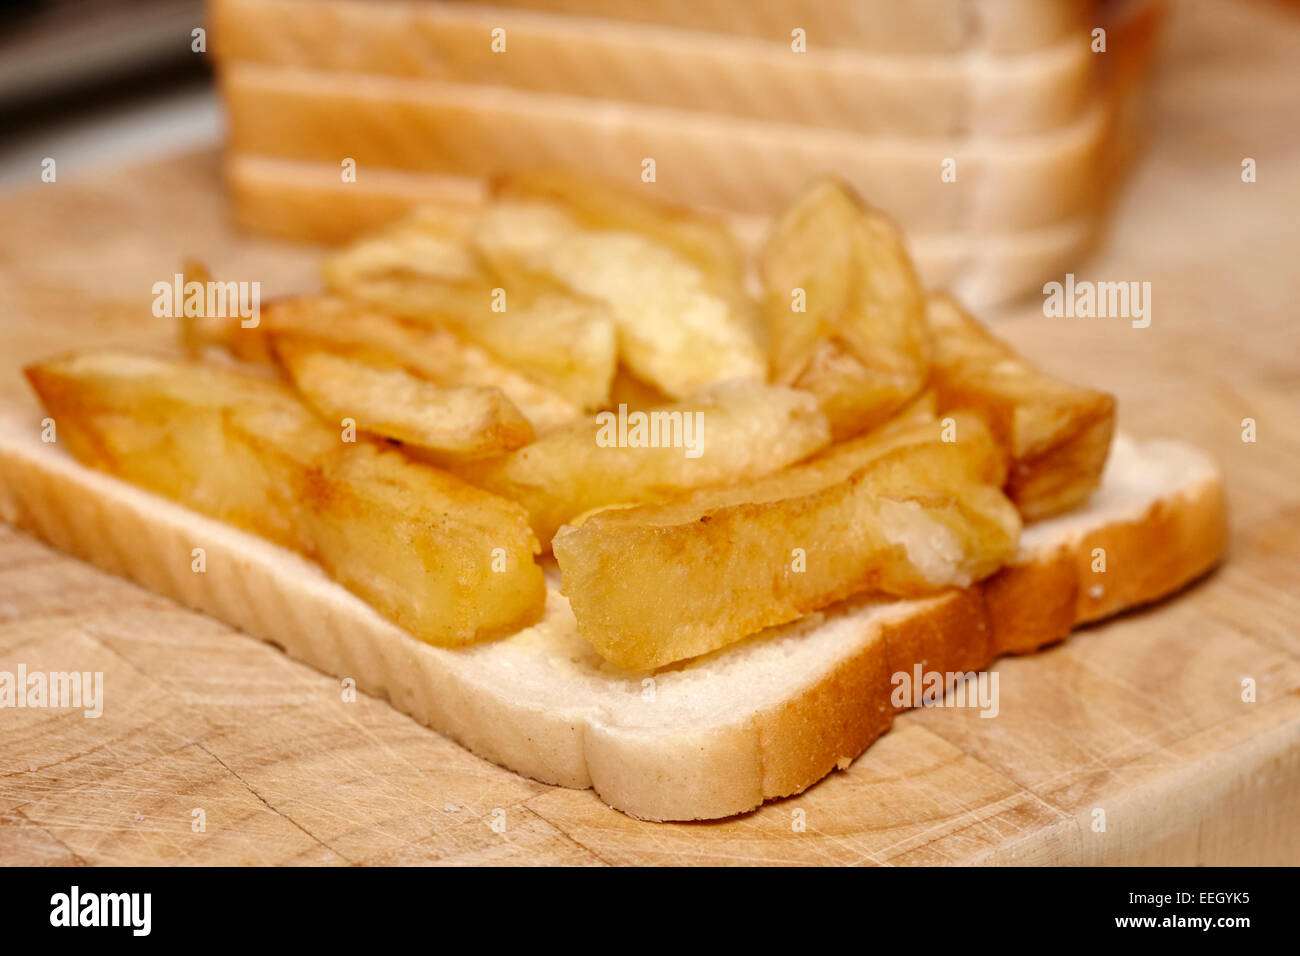 chip butty on buttered white bread Stock Photo